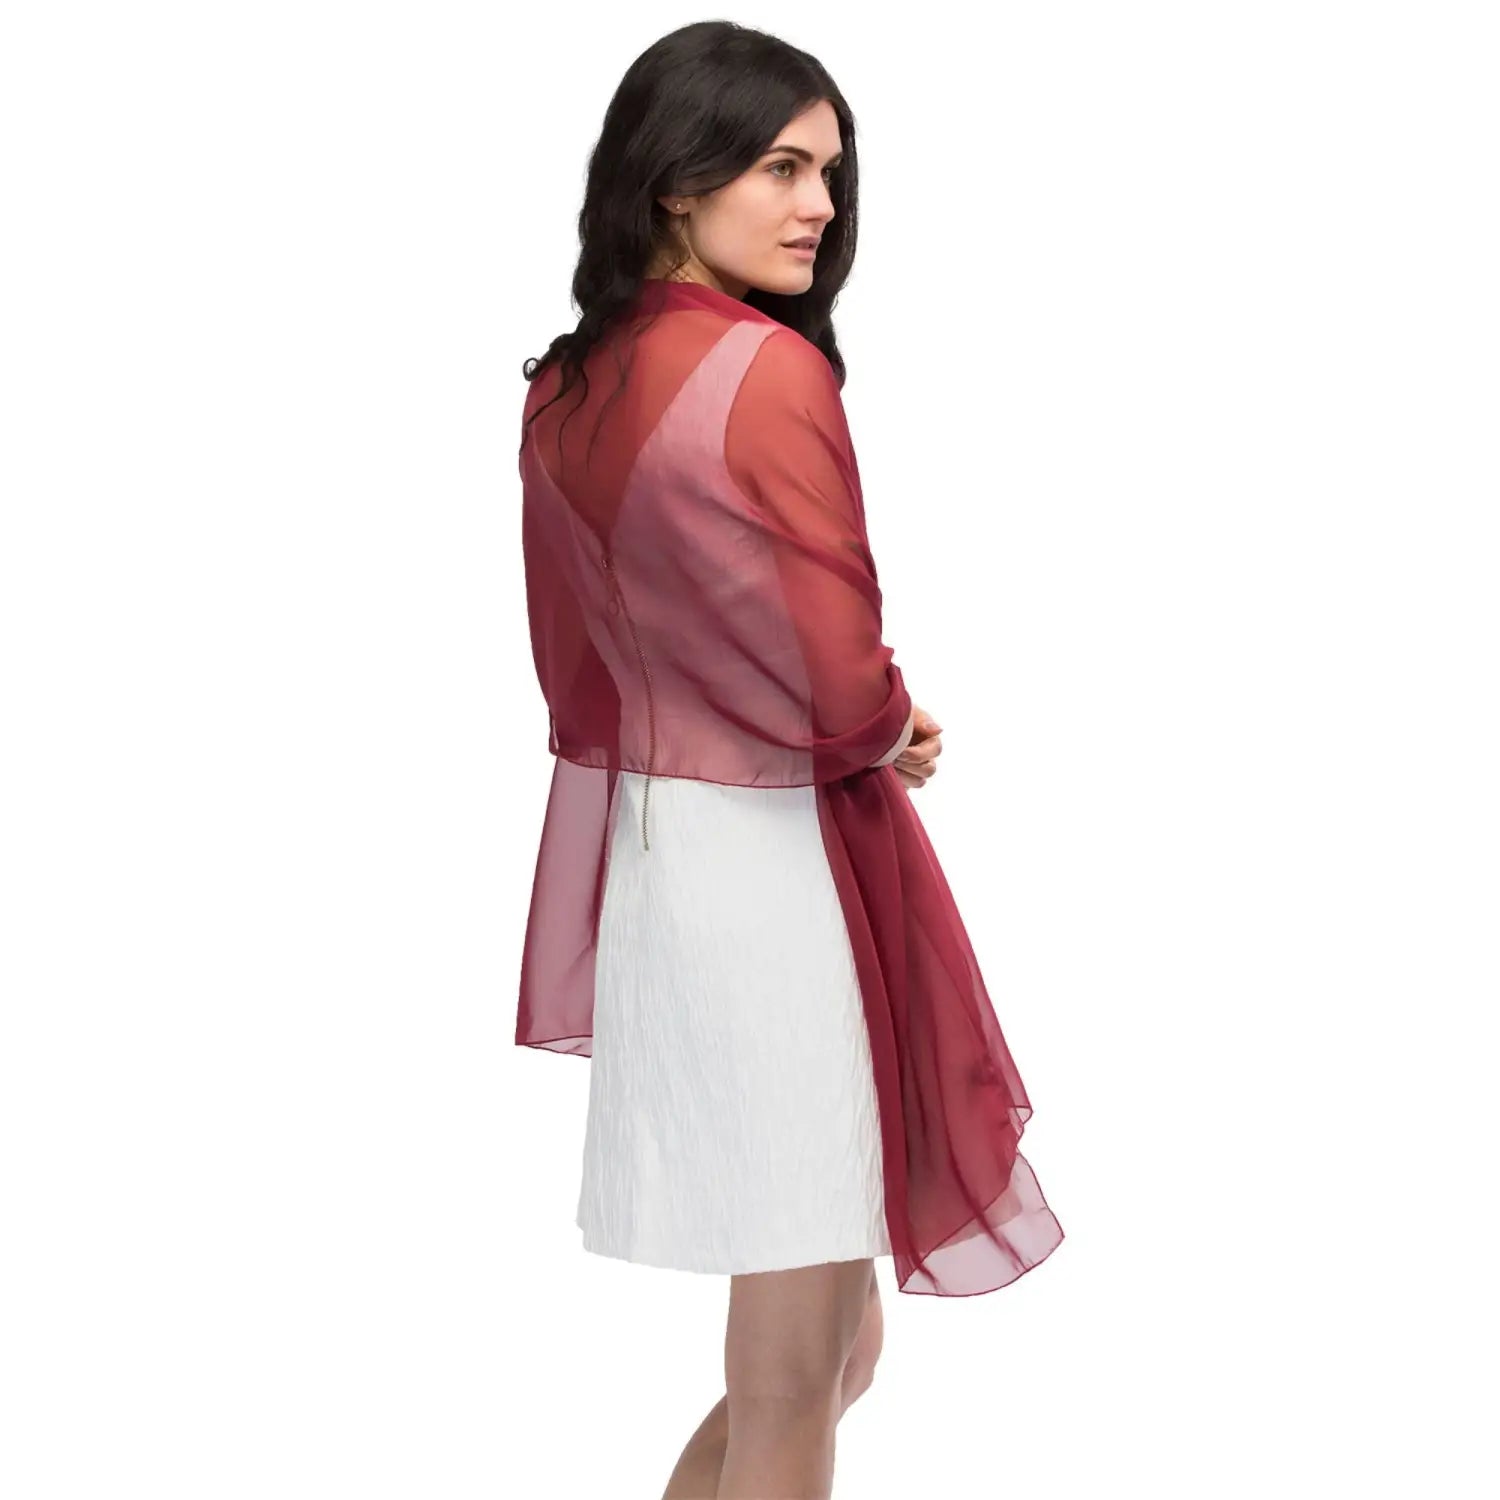 Woman in red blouse and white skirt wearing Plain Chiffon Shawl Semi-Opaque - Versatile Scarf